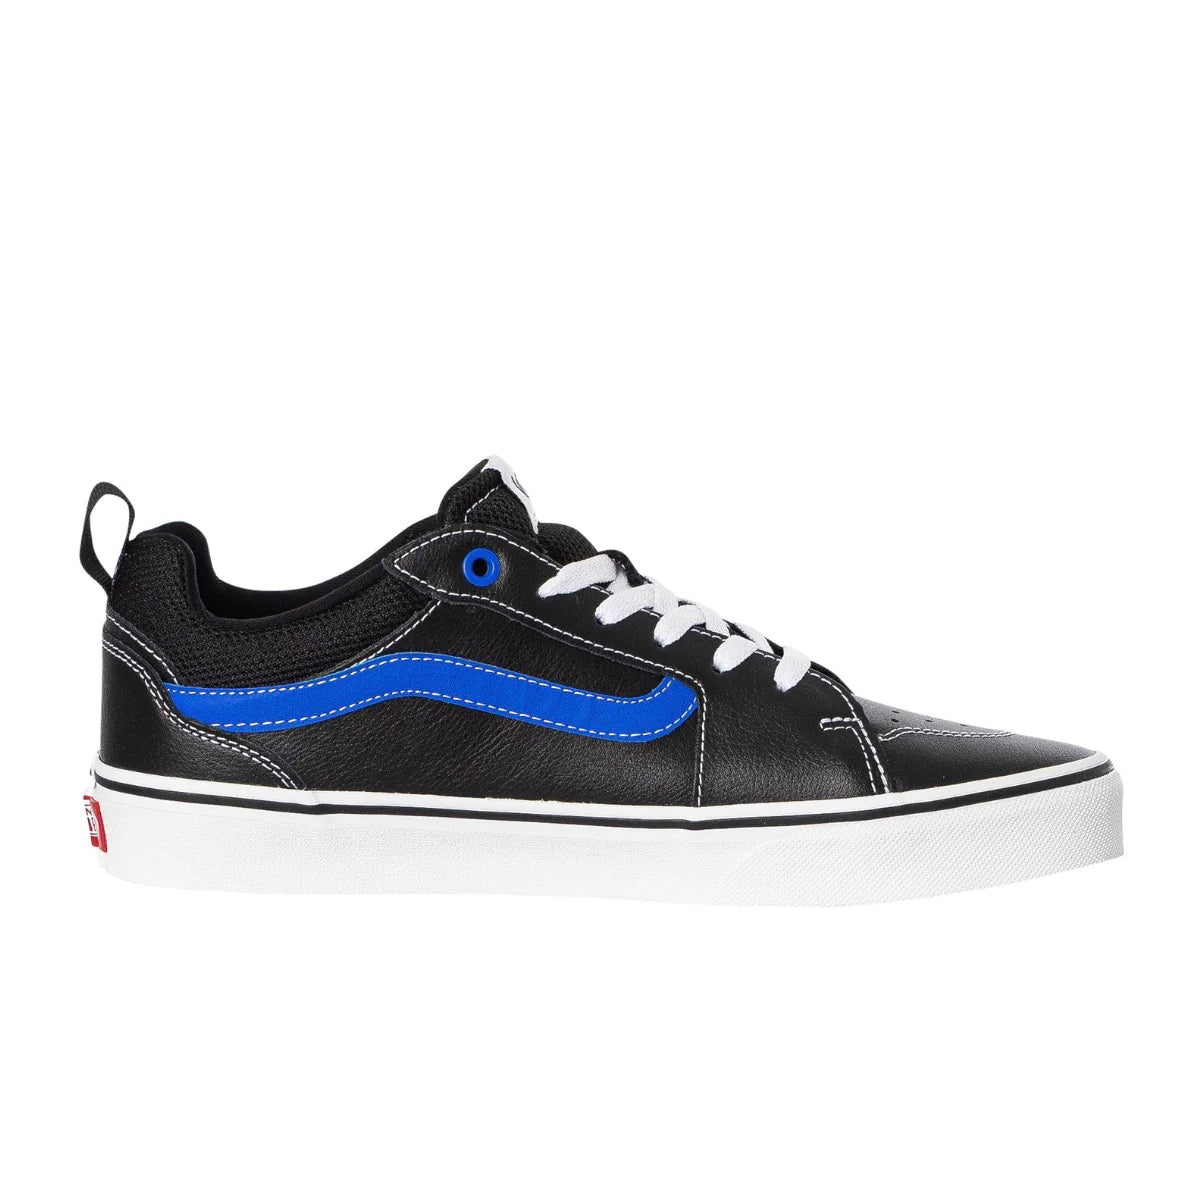 Vans Vans Mens Filmore Leather Vn0a5htxy6z1aw23 Footwear UK6 EU39 / Black,UK7 EU40.5 / Black,UK8 EU42 / Black,UK9 EU43 / Black,UK10 EU44.5 / Black,UK11 EU46 / Black